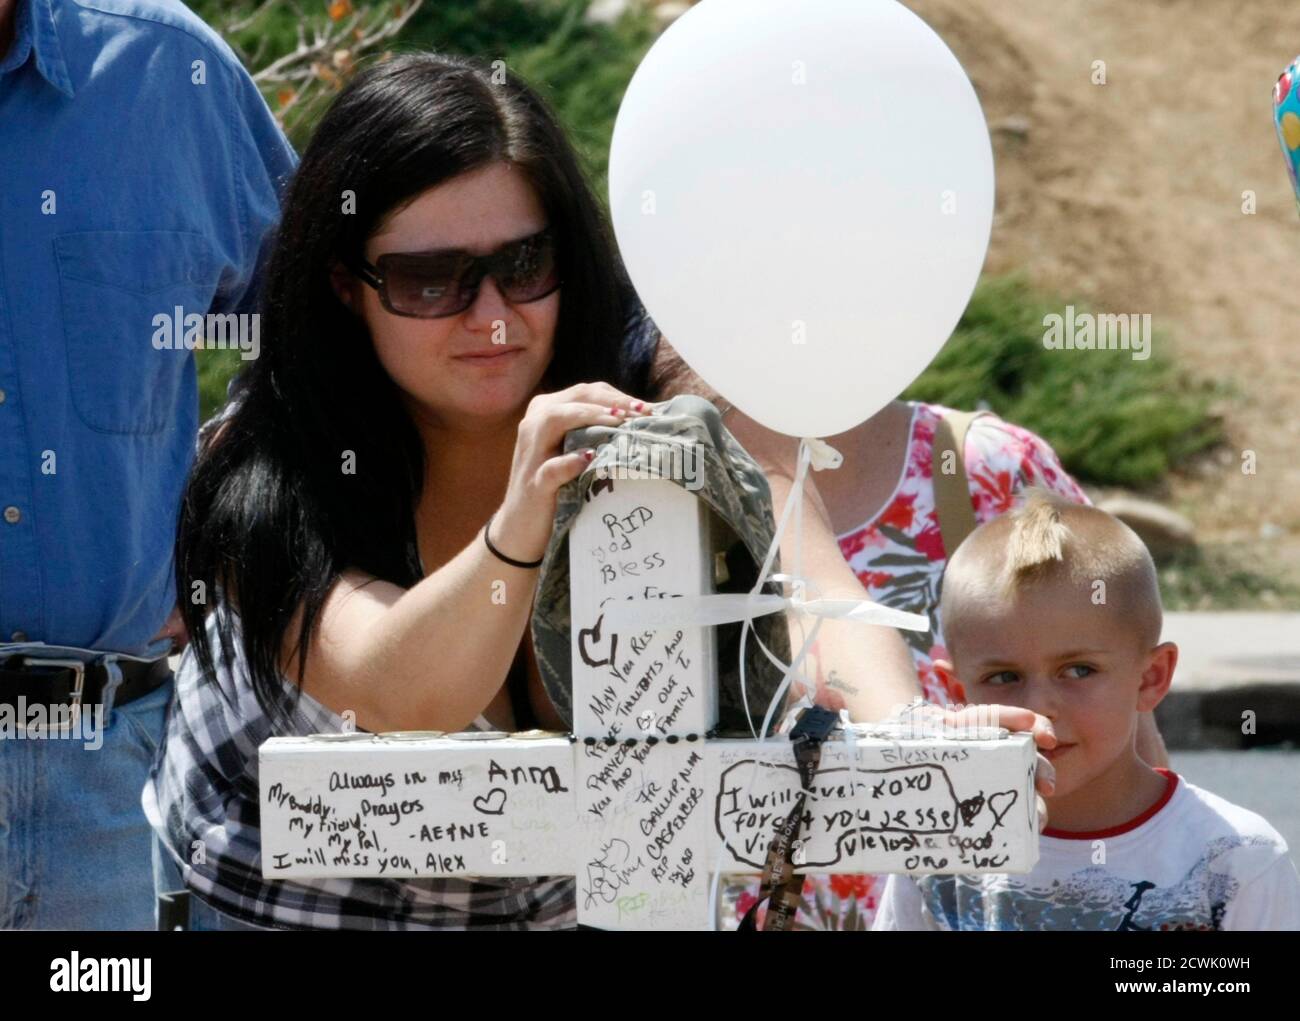 Rebecca Diercks touches the cross for family friend Air Force Staff Sergeant Jesse Childress at a memorial near the movie theater where Childress and 11 other people where killed last Friday in Aurora, Colorado July 23, 2012. REUTERS/Rick Wilking (UNITED STATES - Tags: DISASTER CRIME LAW) Stock Photo